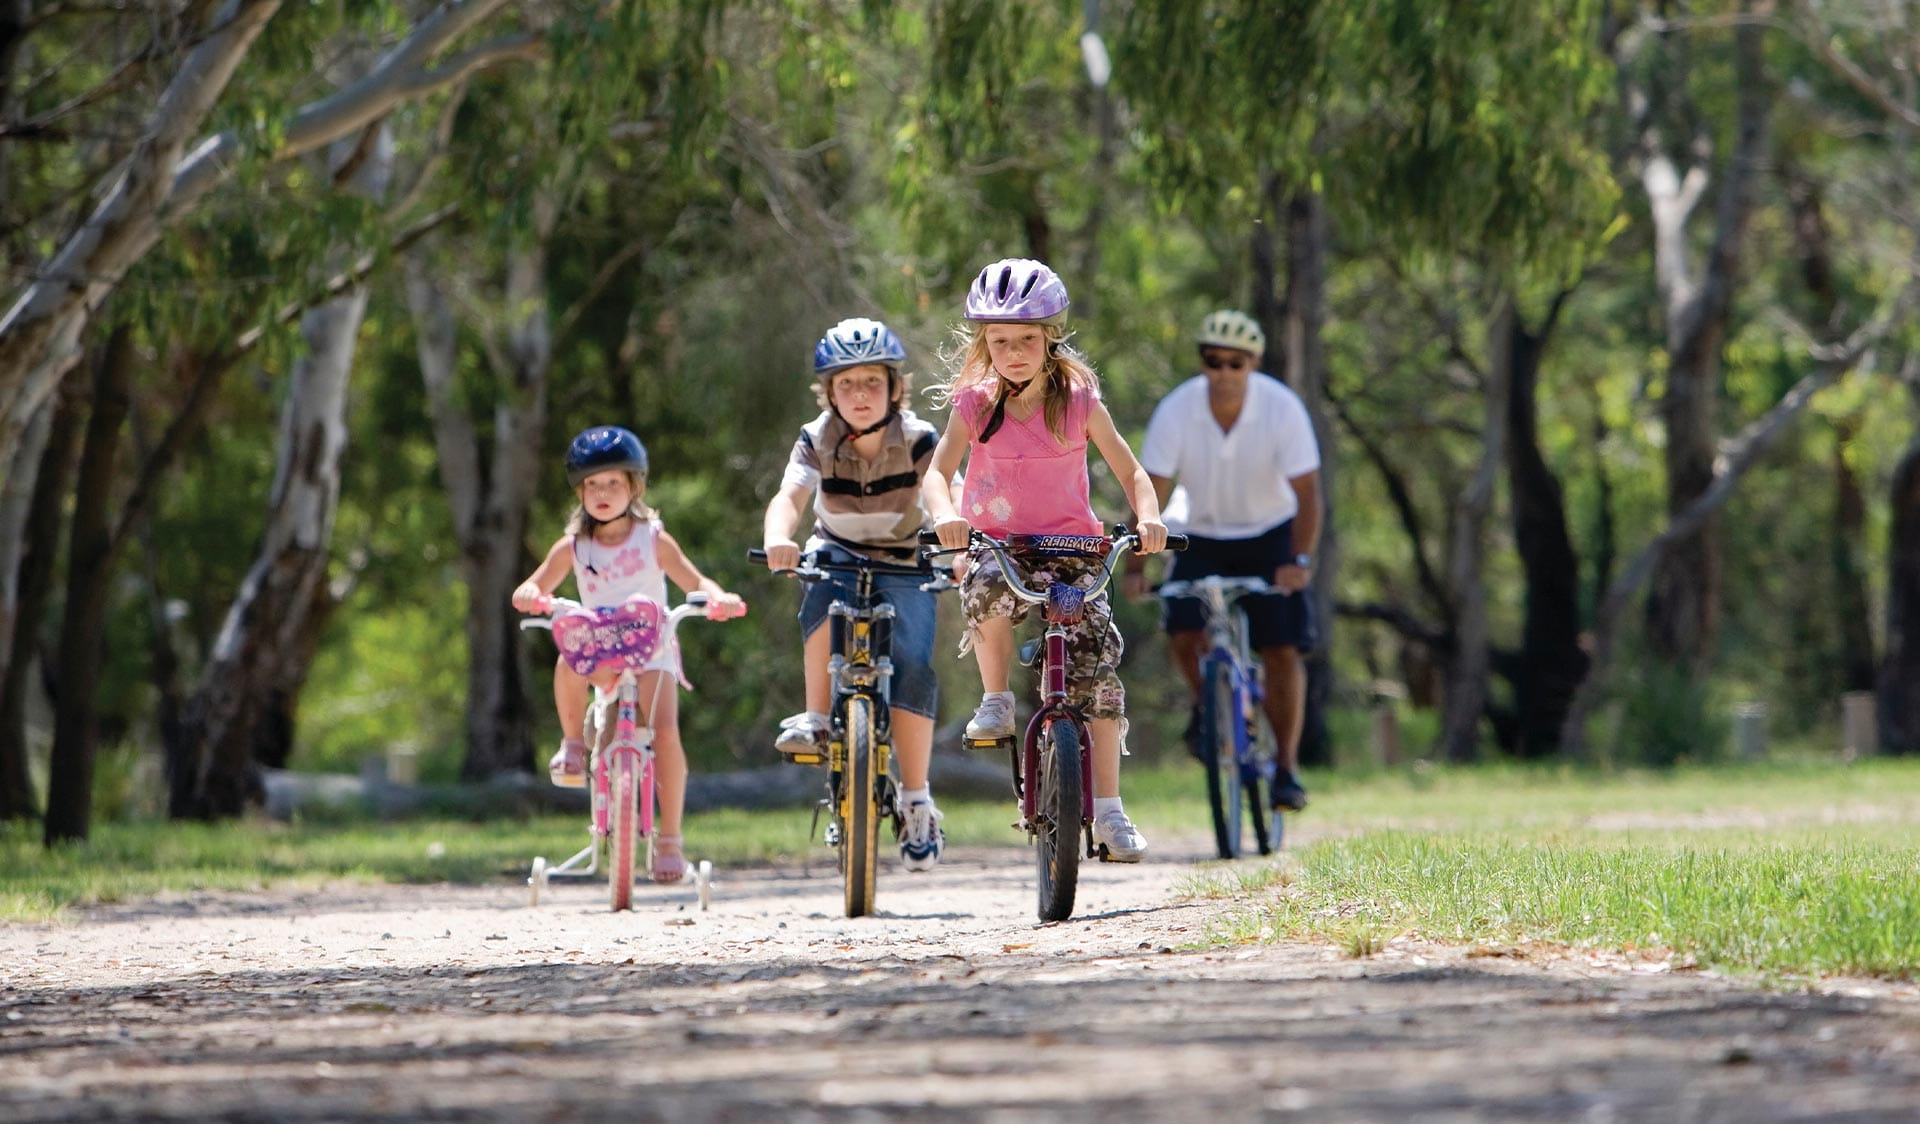 A family cycling on a path surrounded by trees